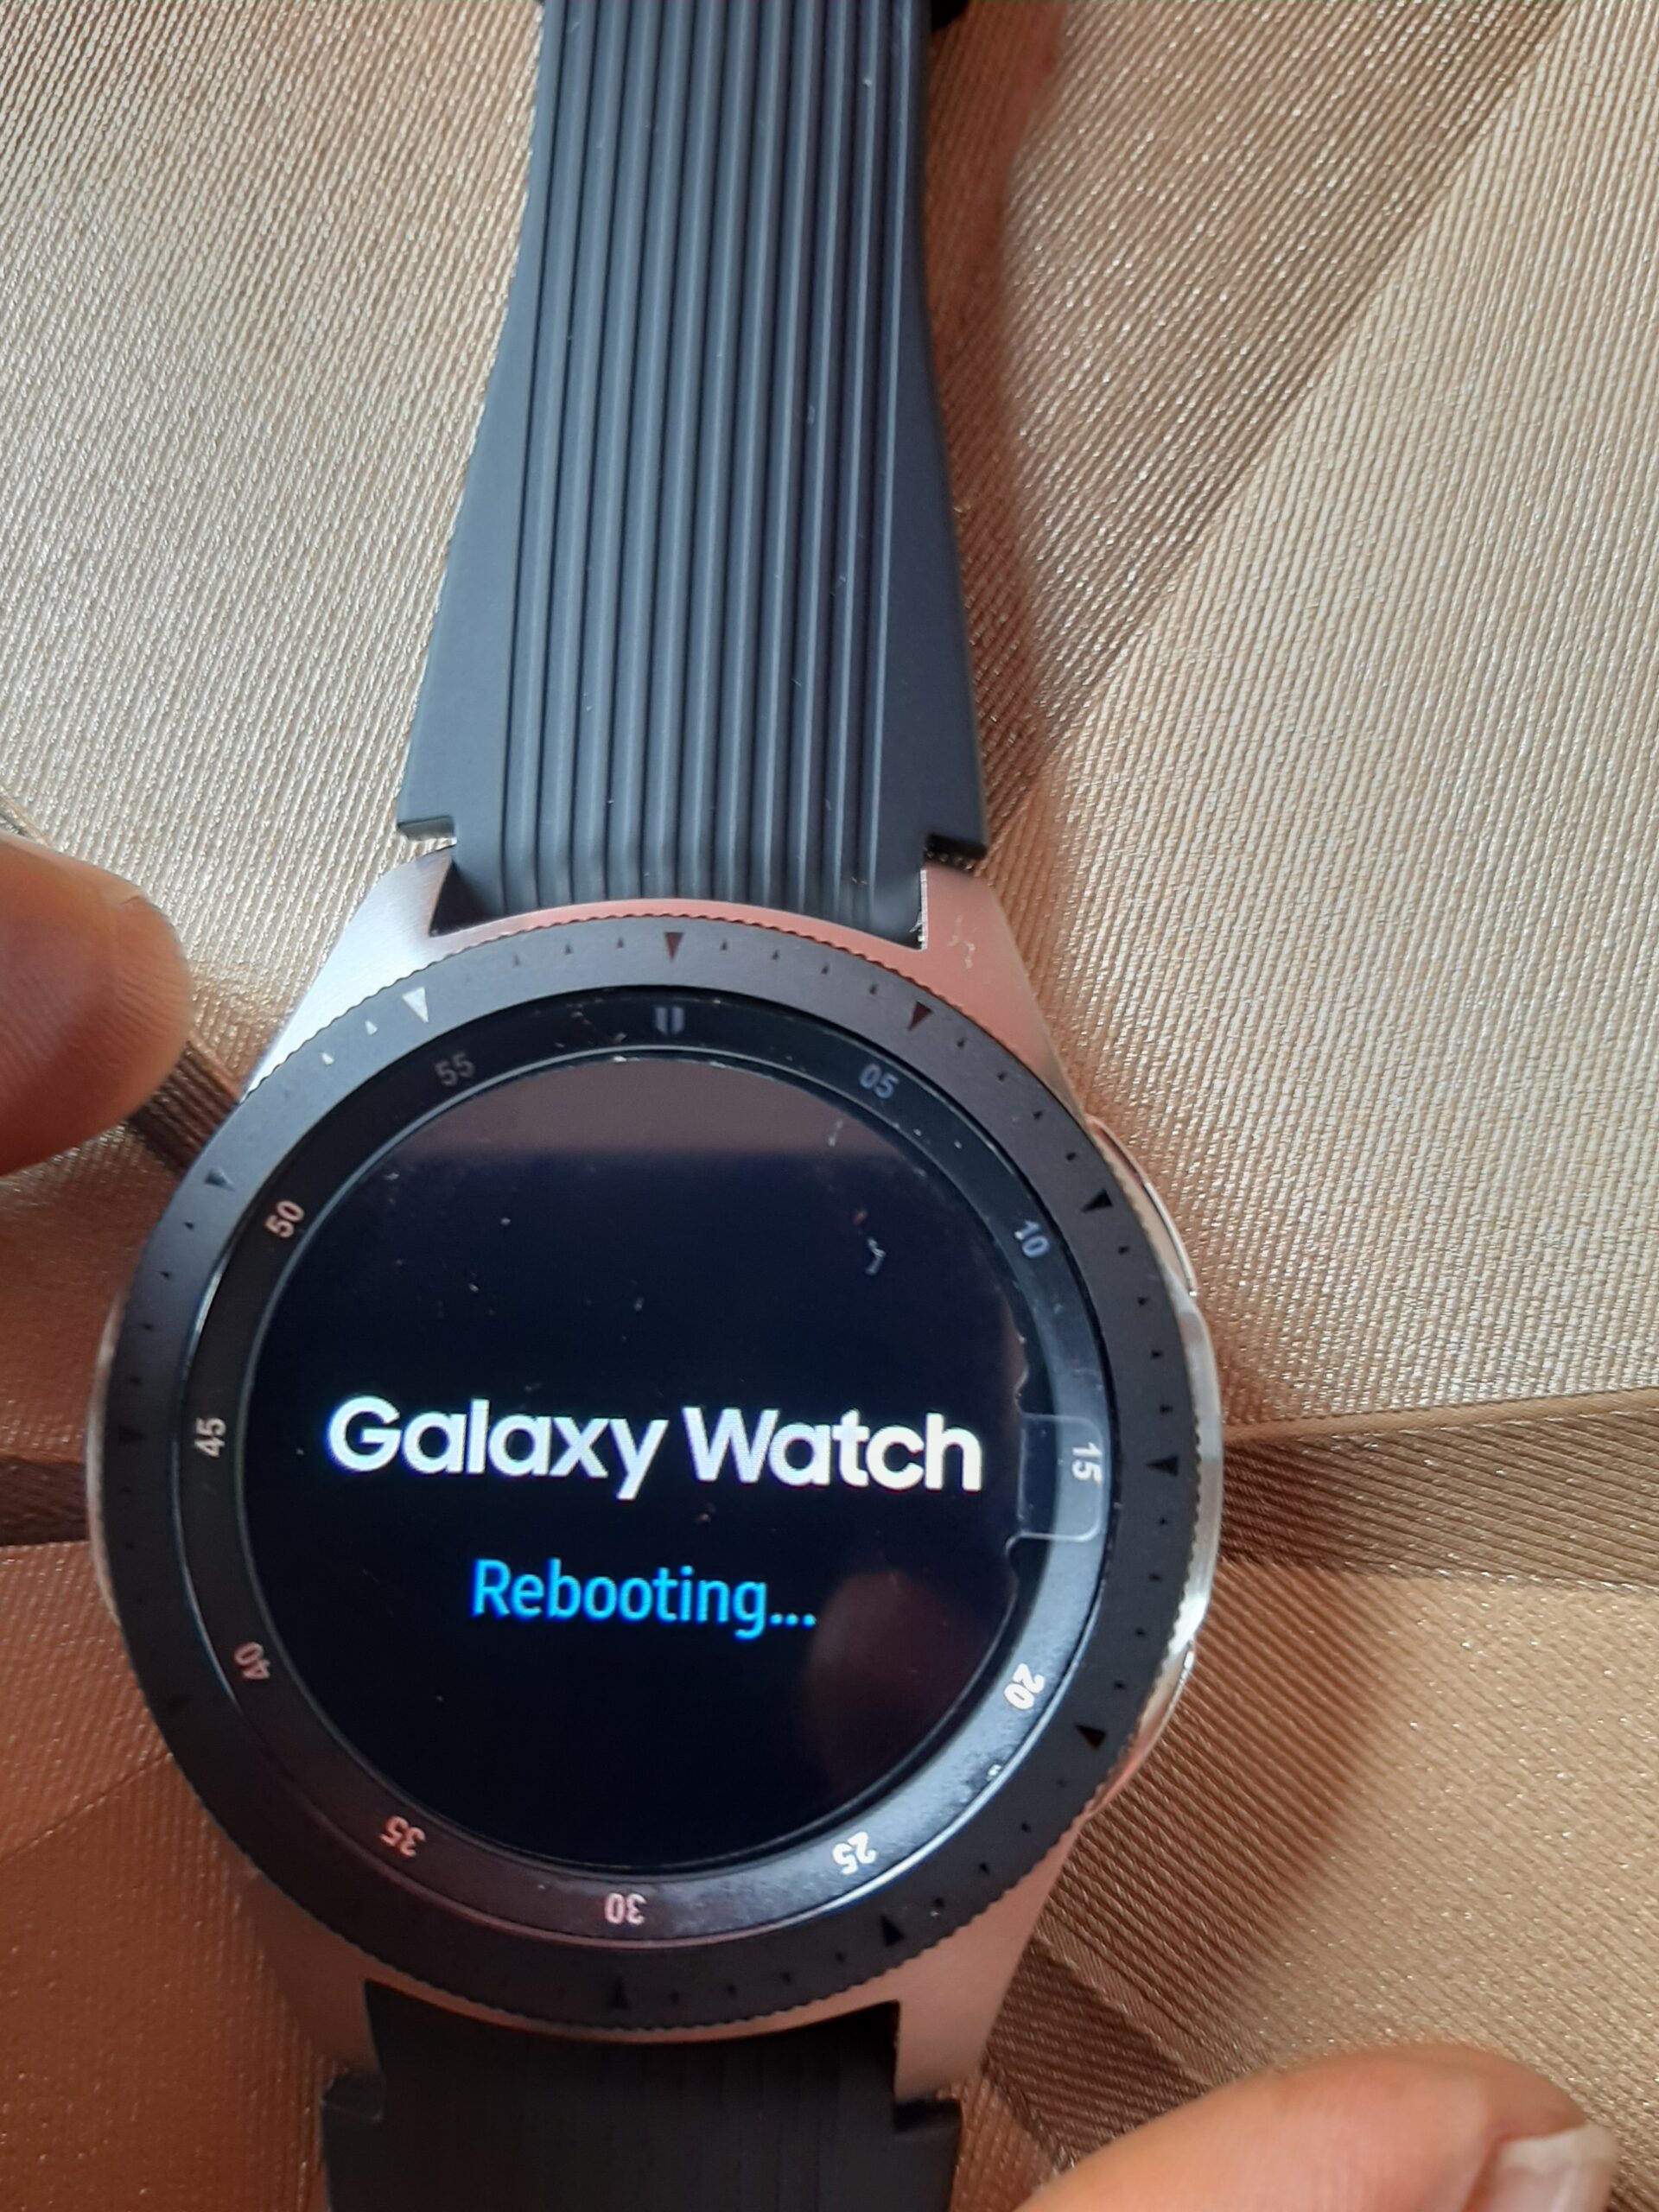 How to Reset Samsung Galaxy Watch to Factory Settings